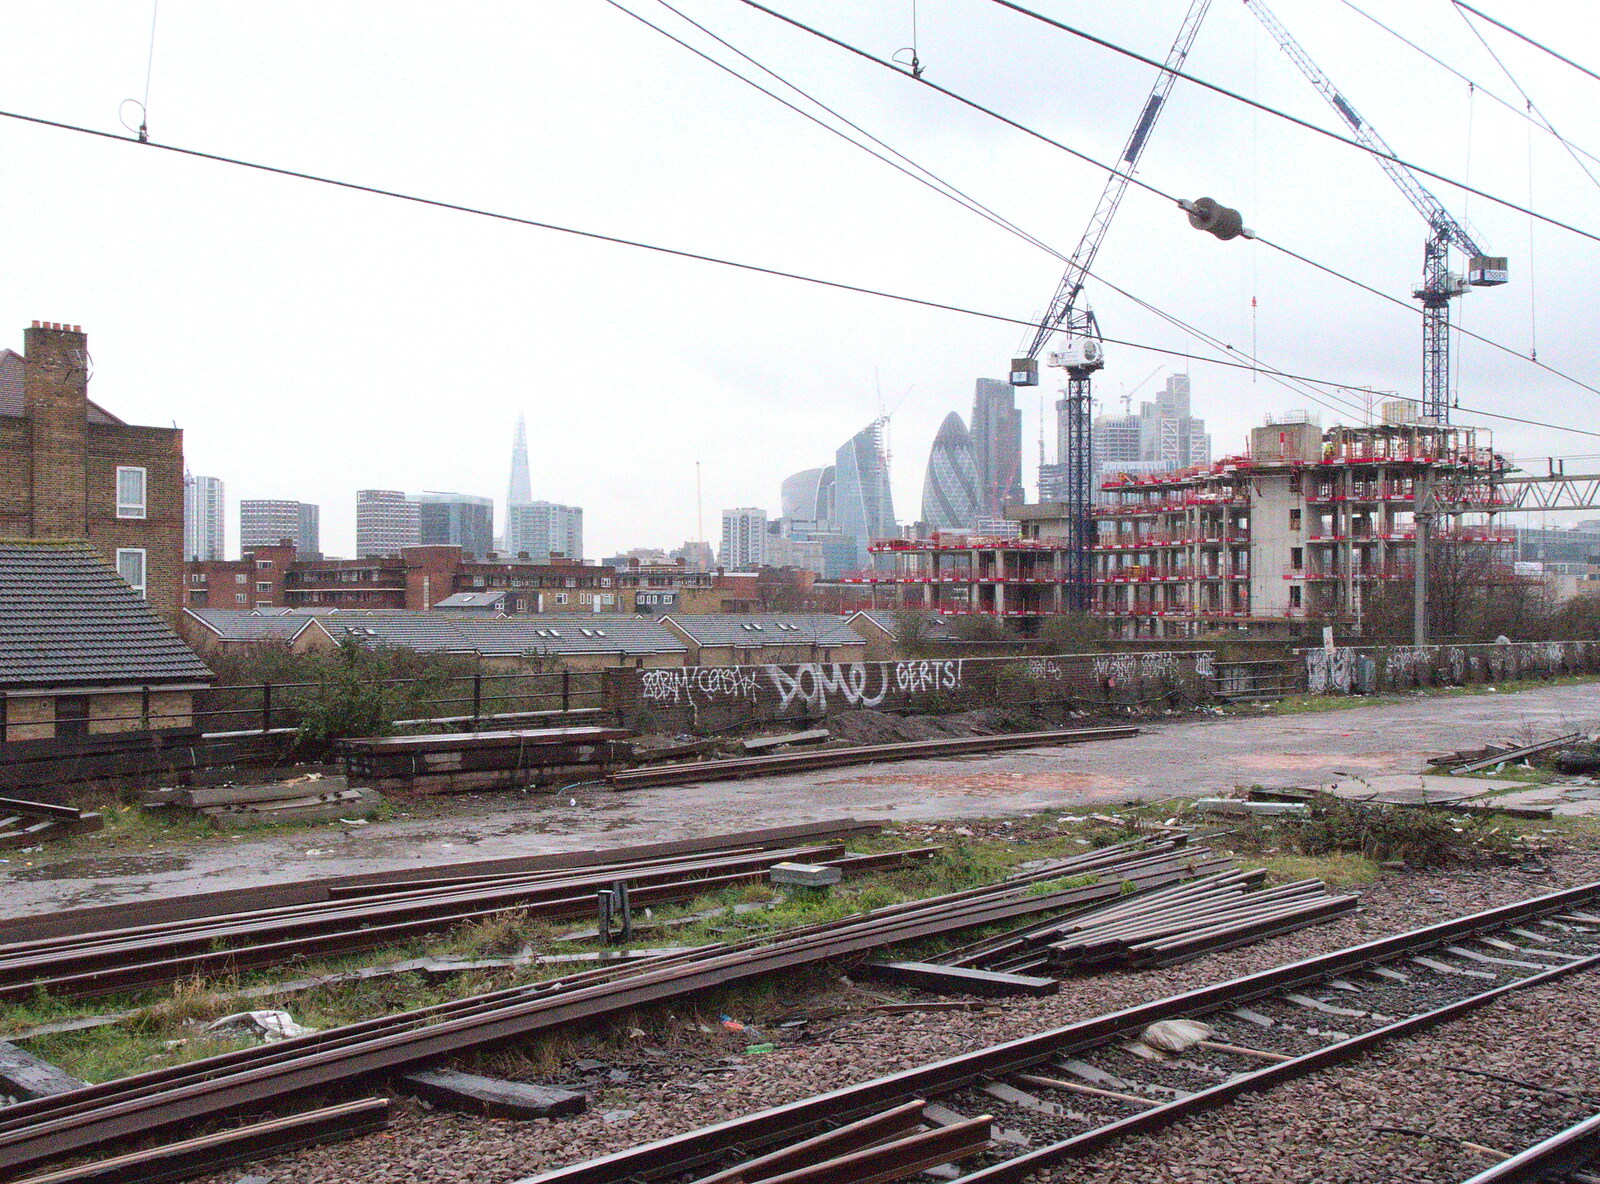 This view of the City is slowly disappearing from Trackside Graffiti, and Harry's Cake, London and Suffolk - 28th March 2018